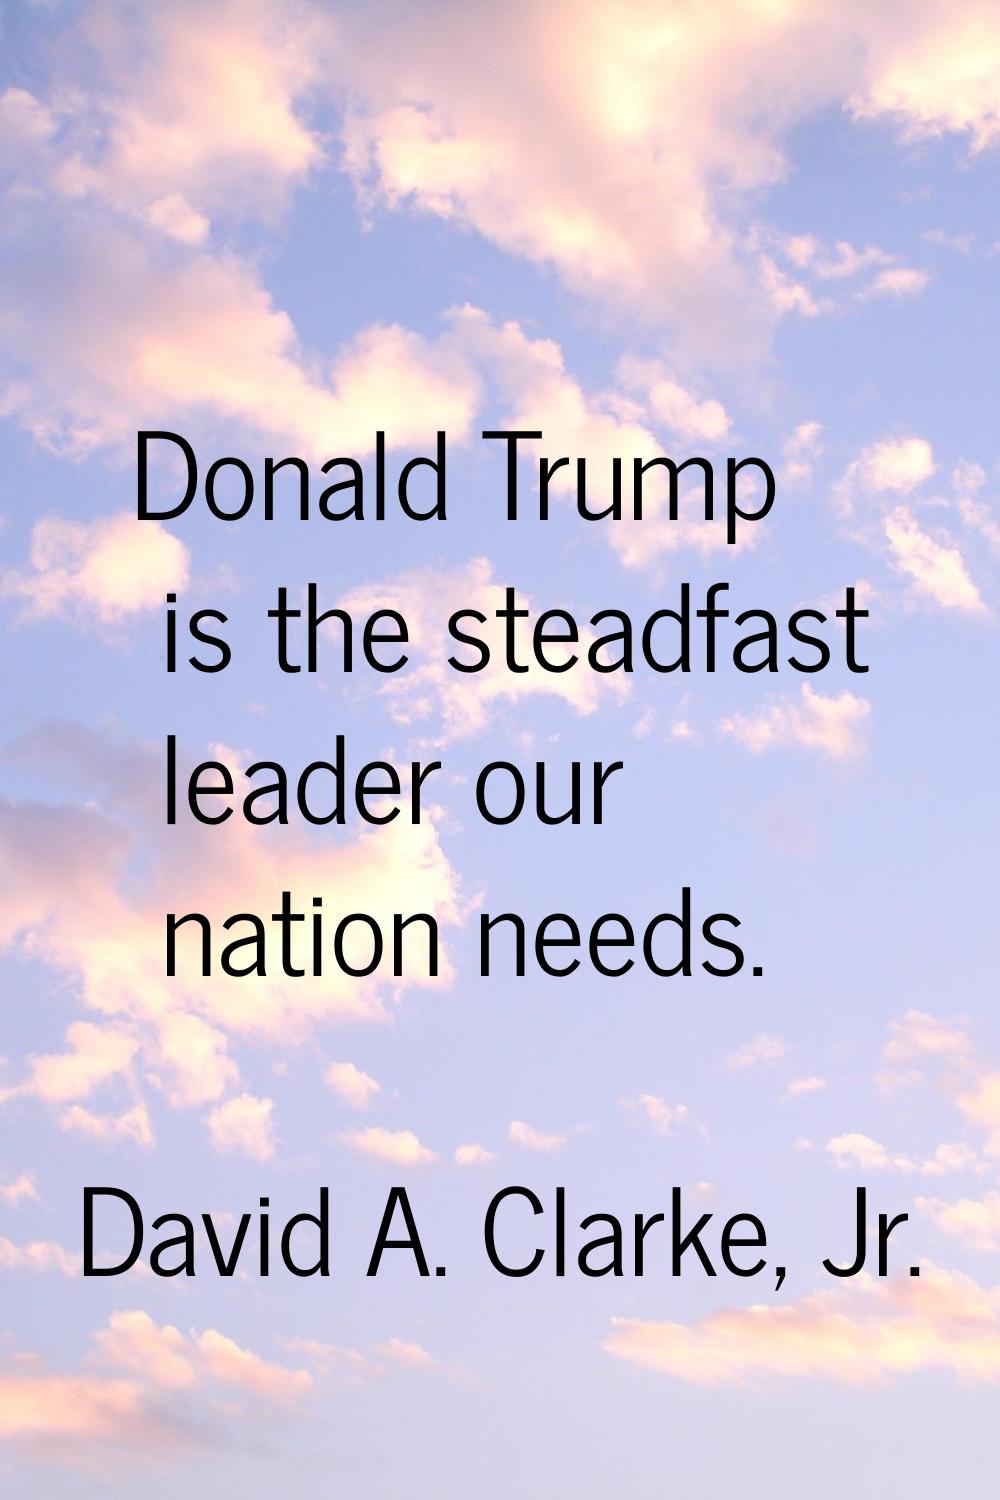 Donald Trump is the steadfast leader our nation needs.